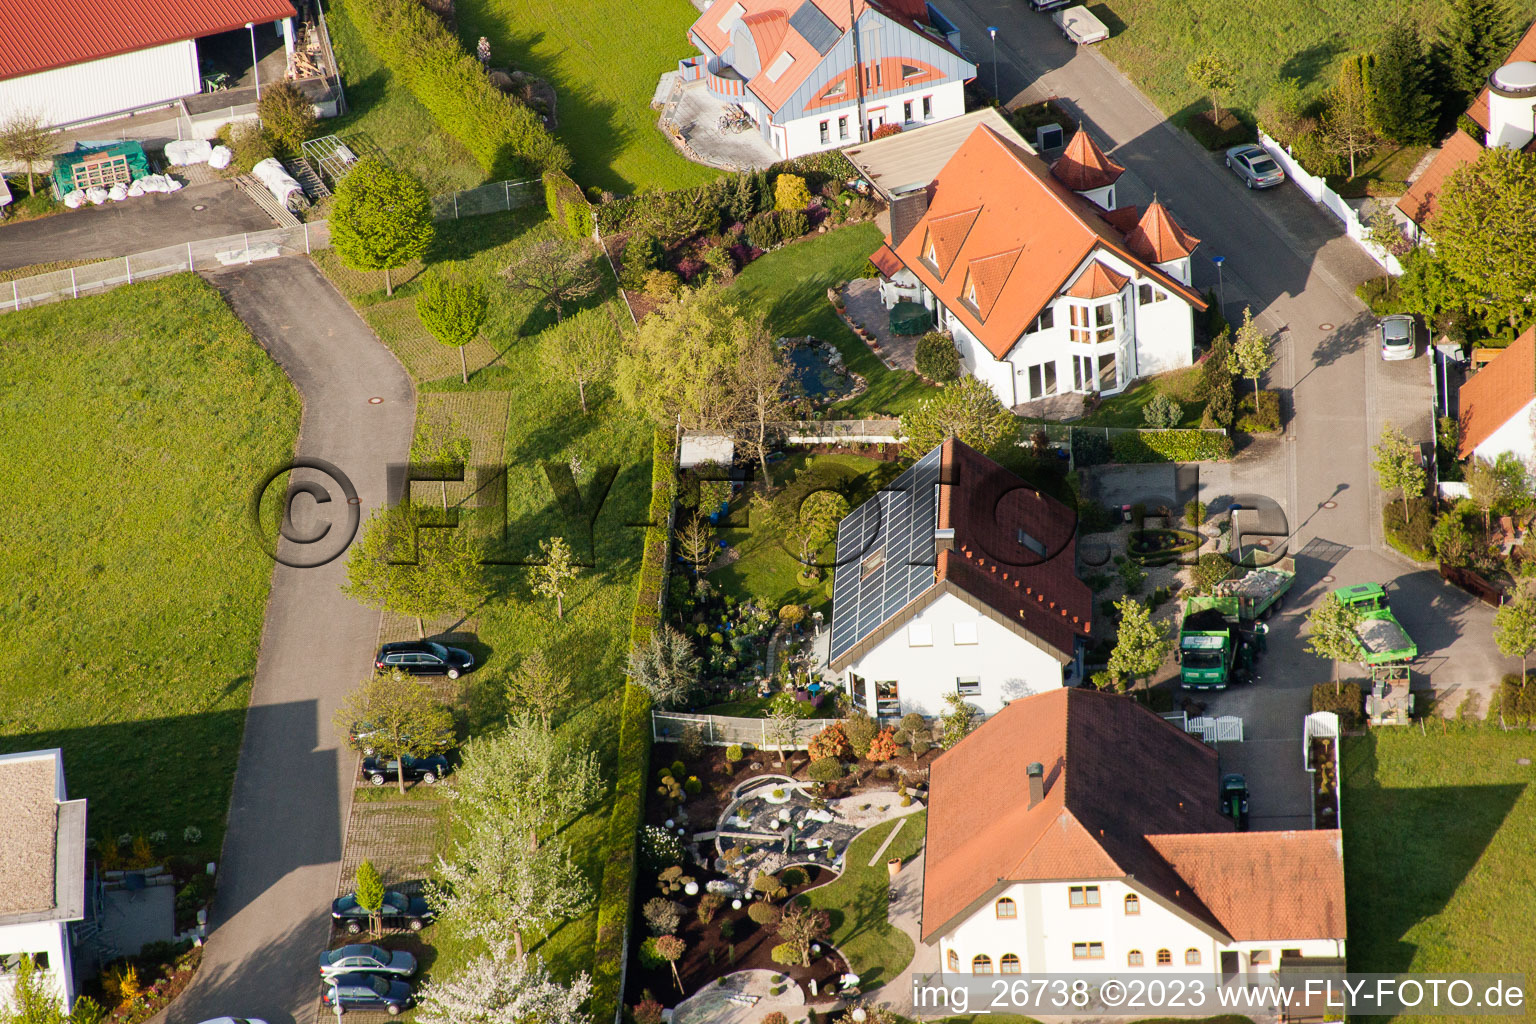 District Stupferich in Karlsruhe in the state Baden-Wuerttemberg, Germany seen from above